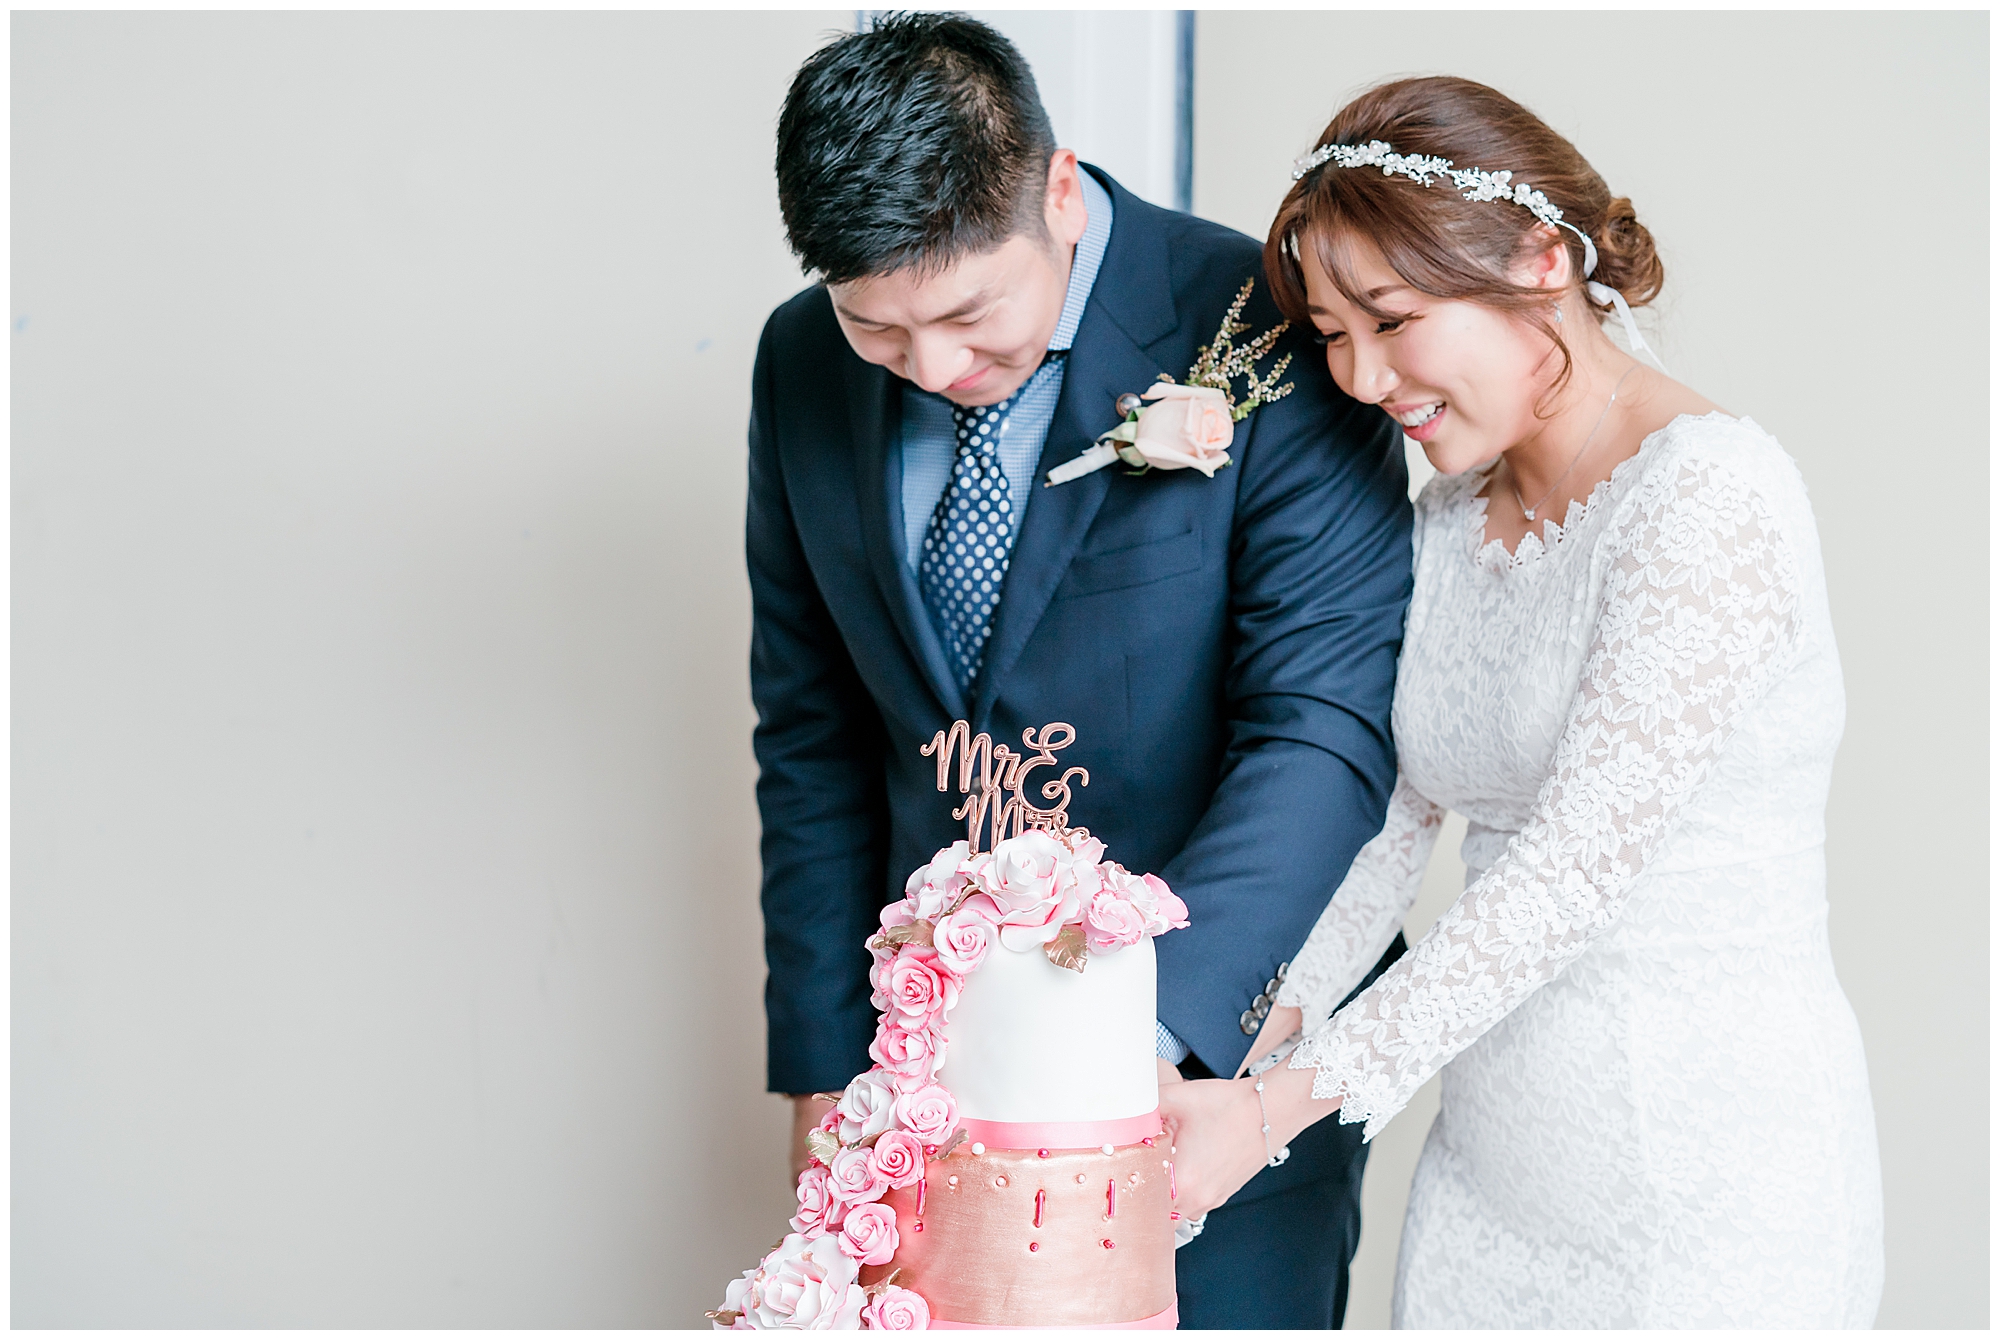 Bride and groom cutting pink and rose gold wedding cake